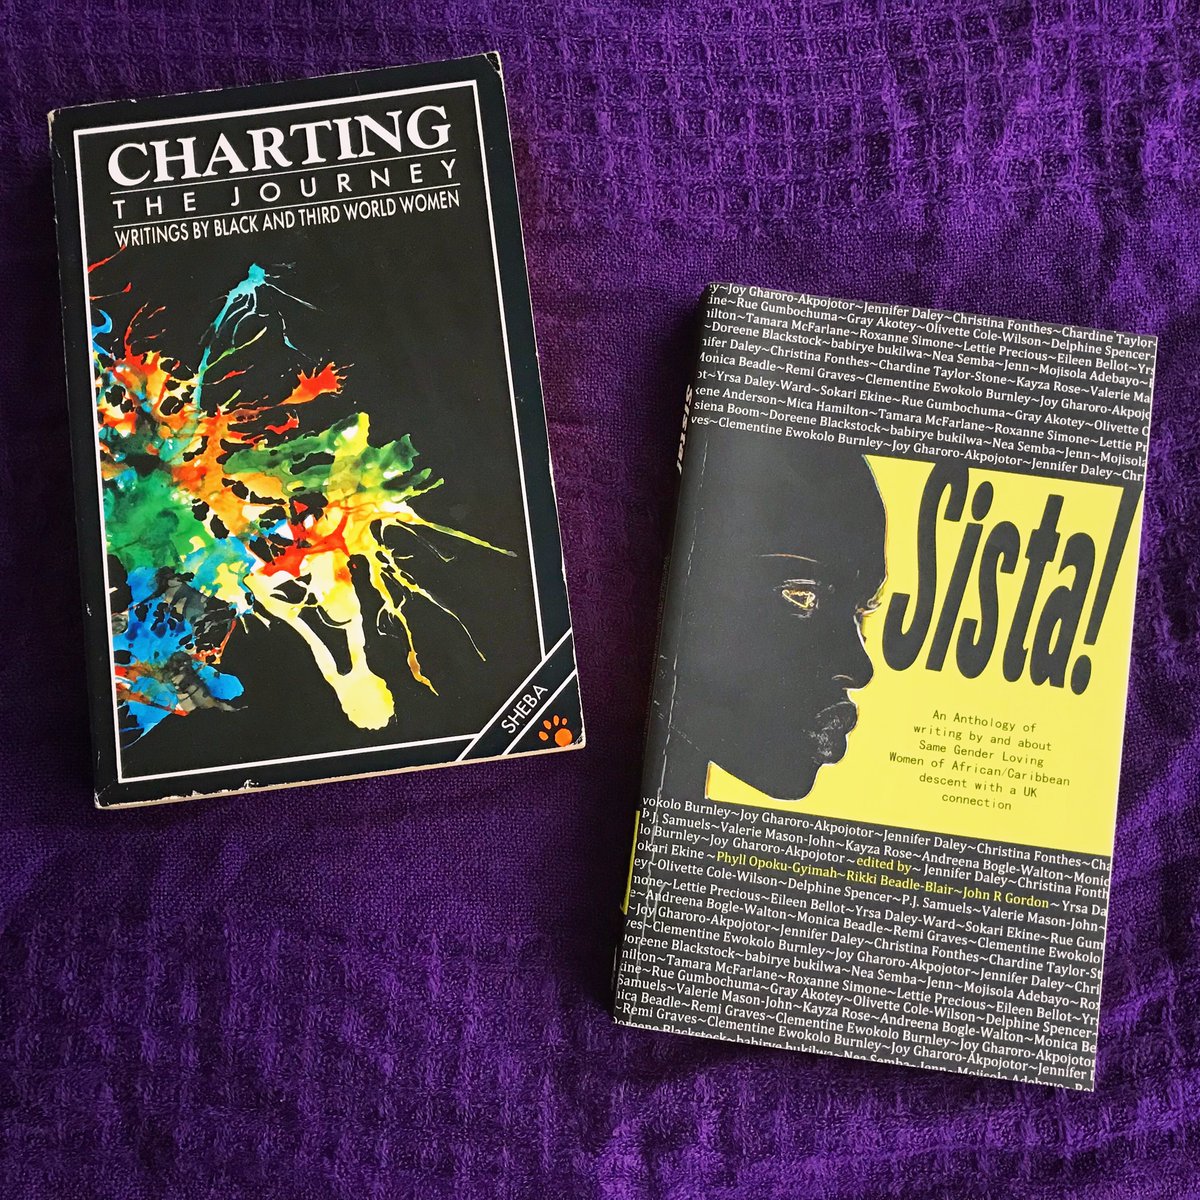  Charting the Journey: Writings By Black and Third World Women Sista!Two under-appreciated gems too often overlooked by the feminist canon. These collections give voice to the experiences of lesbians of colour in Britain. Bold, imaginative writing. #OurFeministLibrary